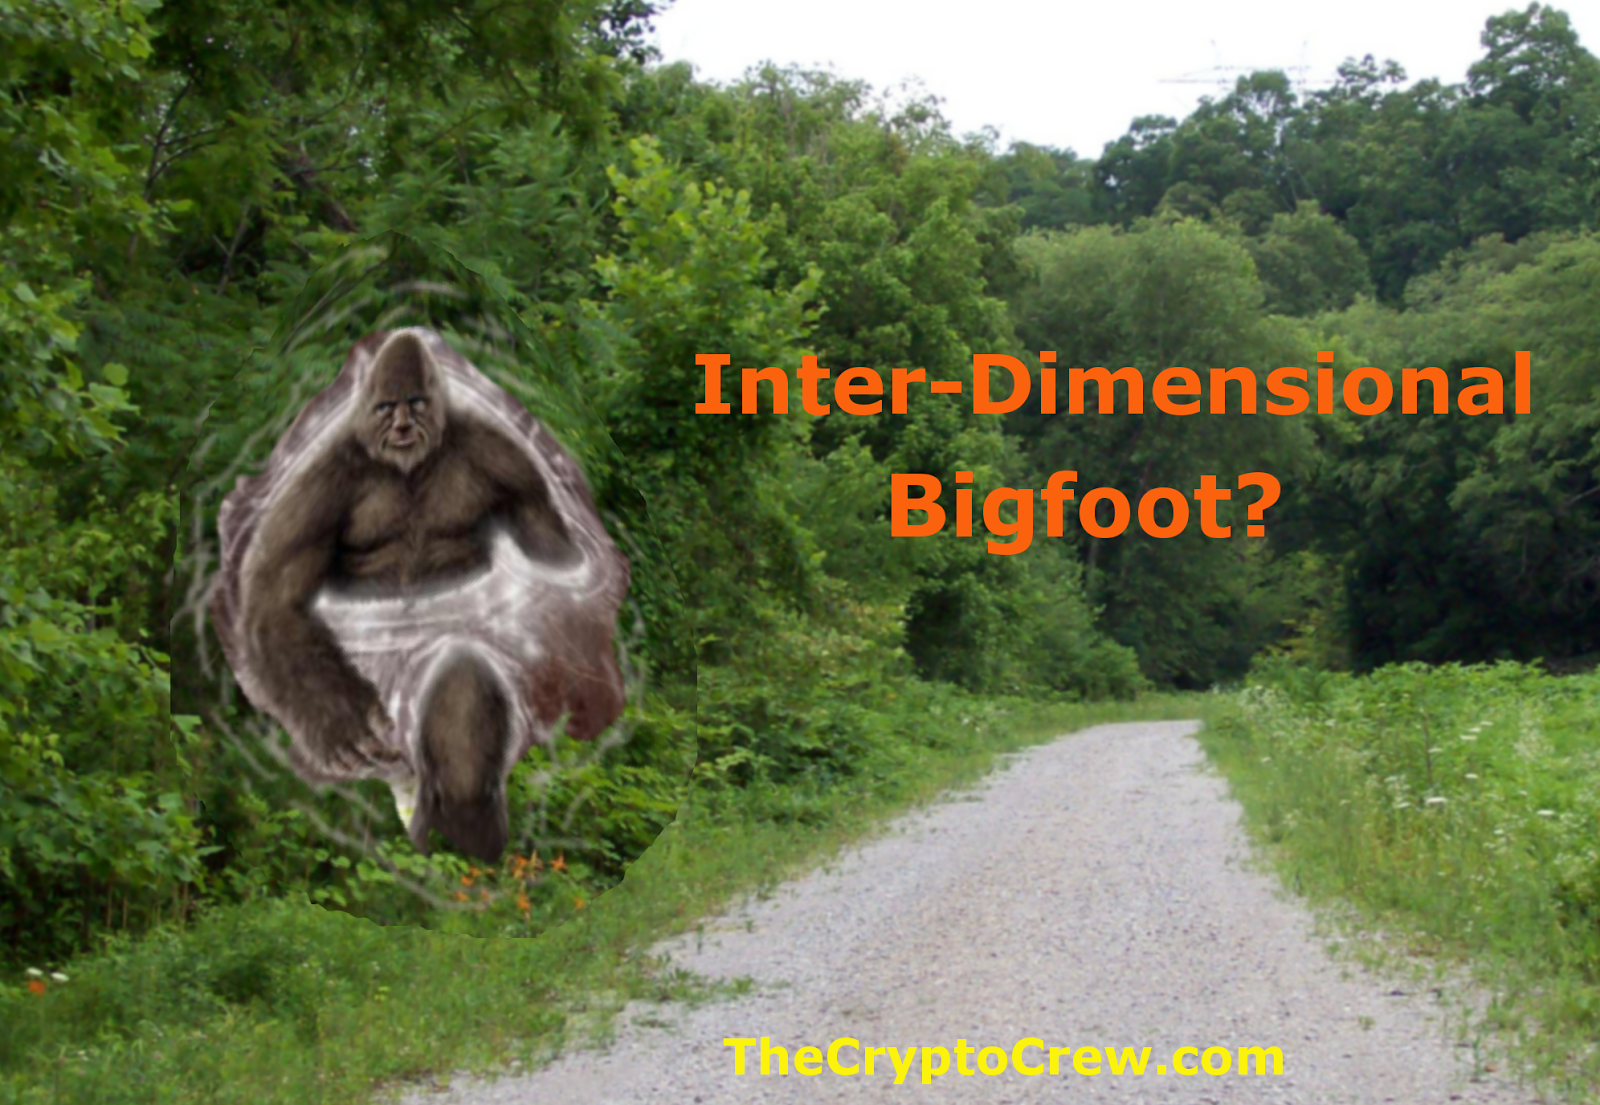 Can Bigfoot travel in Dimensions